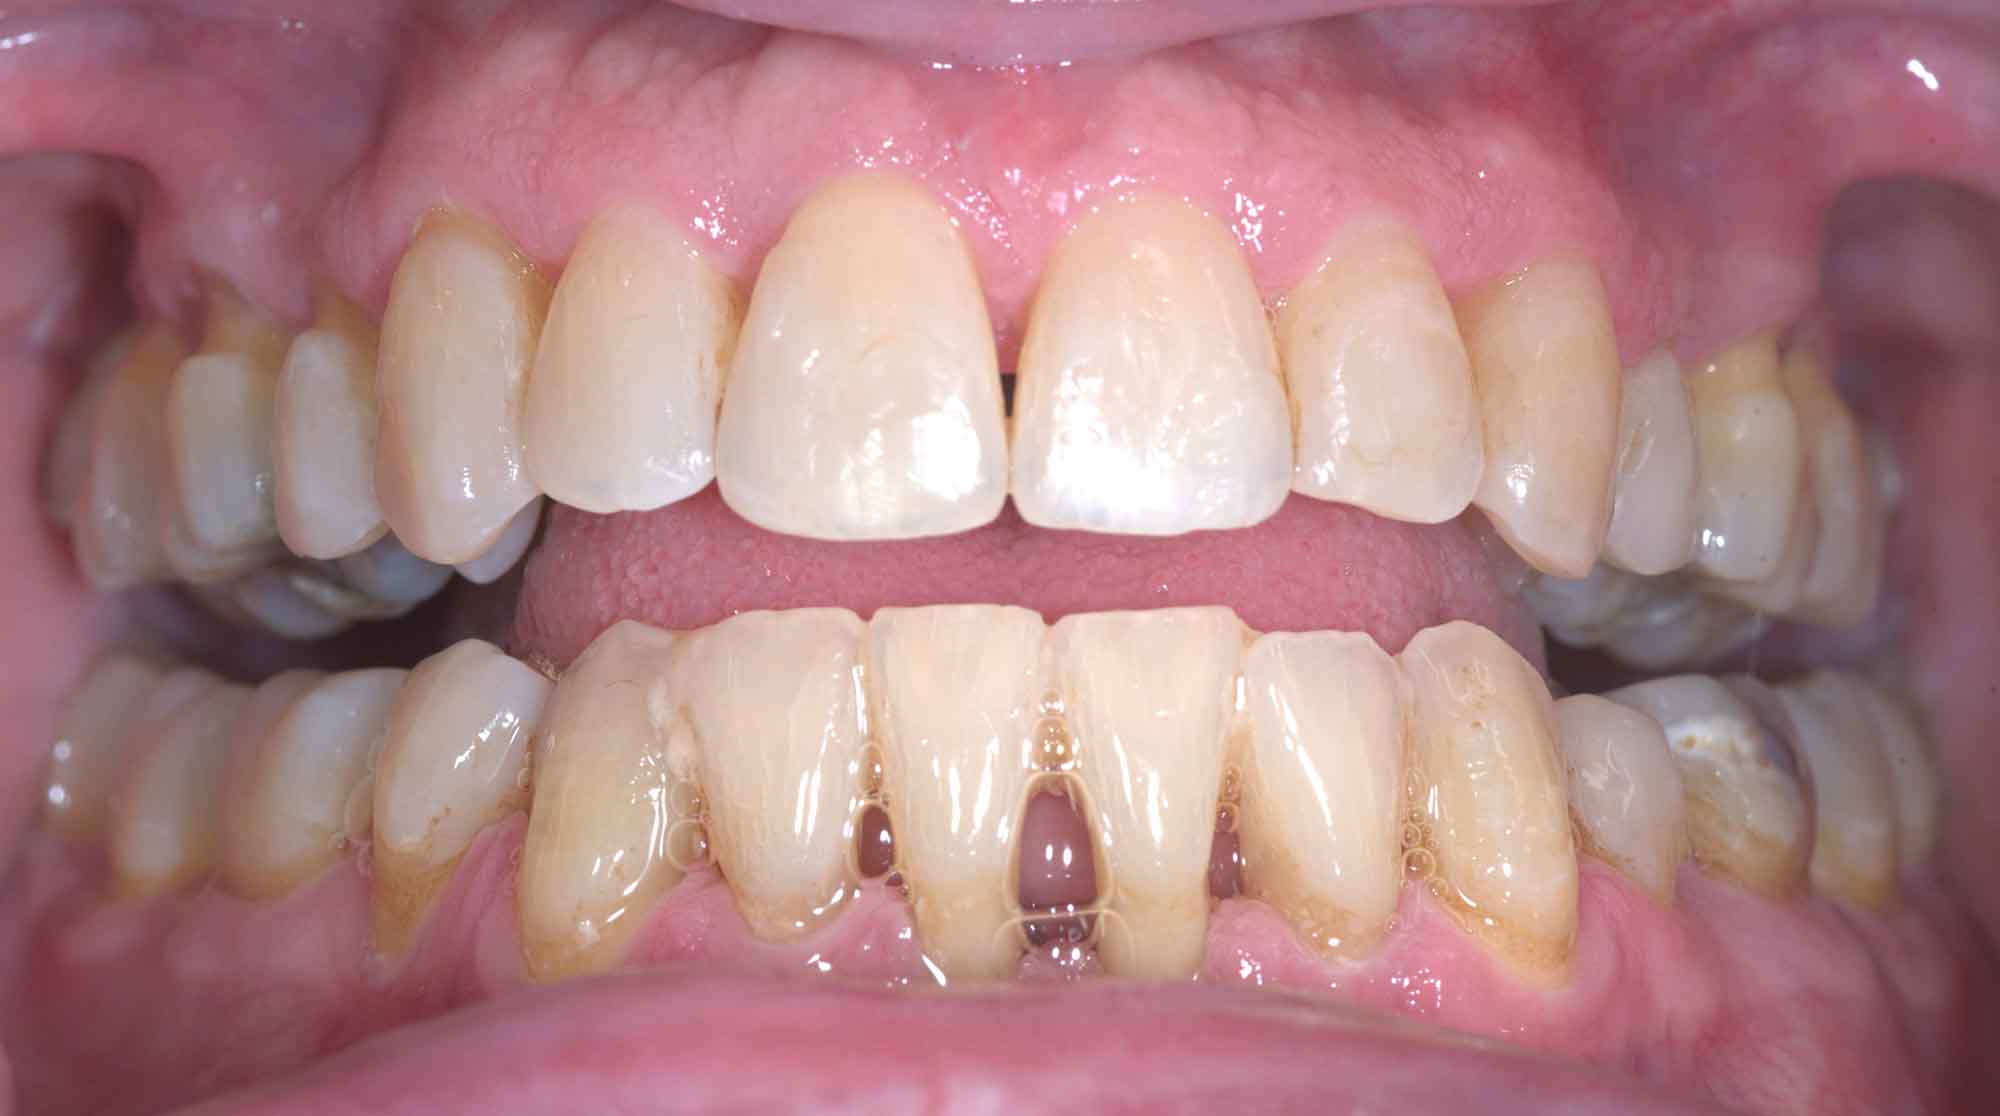 Second example after Invisalign